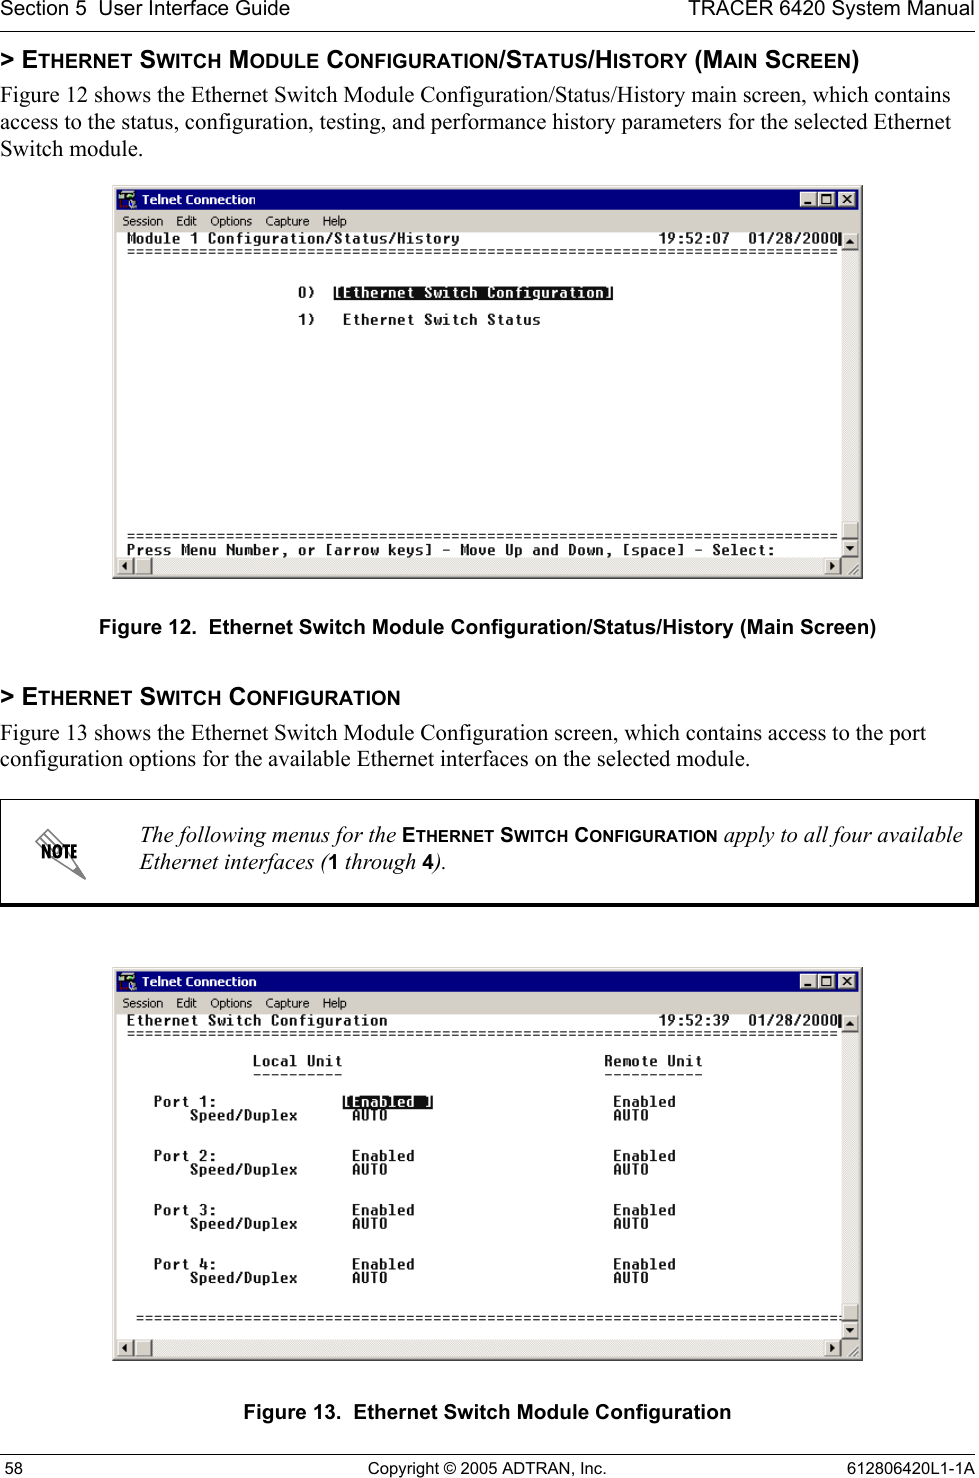 Section 5  User Interface Guide TRACER 6420 System Manual 58 Copyright © 2005 ADTRAN, Inc. 612806420L1-1A&gt; ETHERNET SWITCH MODULE CONFIGURATION/STATUS/HISTORY (MAIN SCREEN)Figure 12 shows the Ethernet Switch Module Configuration/Status/History main screen, which contains access to the status, configuration, testing, and performance history parameters for the selected Ethernet Switch module.Figure 12.  Ethernet Switch Module Configuration/Status/History (Main Screen)&gt; ETHERNET SWITCH CONFIGURATIONFigure 13 shows the Ethernet Switch Module Configuration screen, which contains access to the port configuration options for the available Ethernet interfaces on the selected module.Figure 13.  Ethernet Switch Module ConfigurationThe following menus for the ETHERNET SWITCH CONFIGURATION apply to all four available Ethernet interfaces (1 through 4).